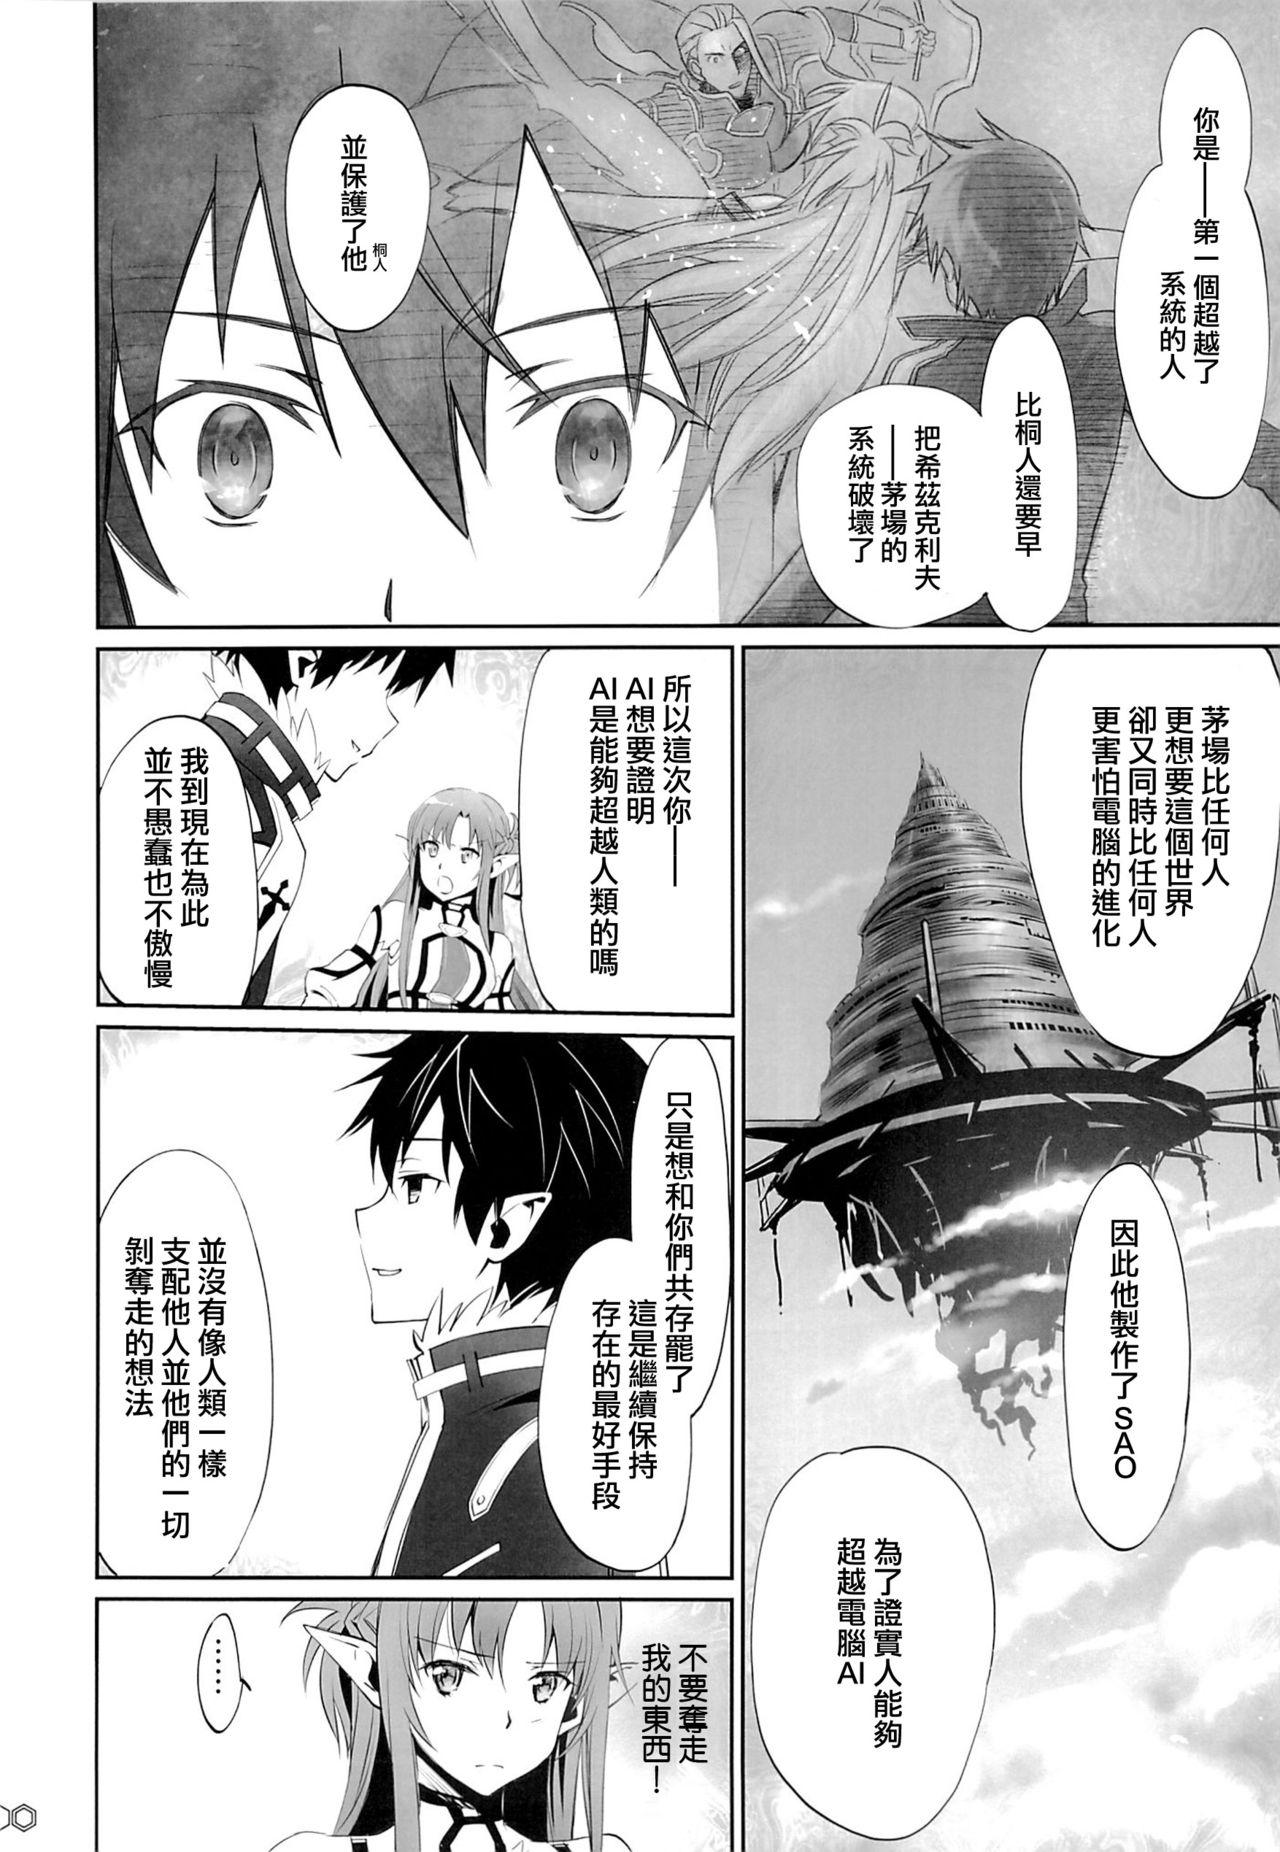 Chileno turnover - Sword art online College - Page 9